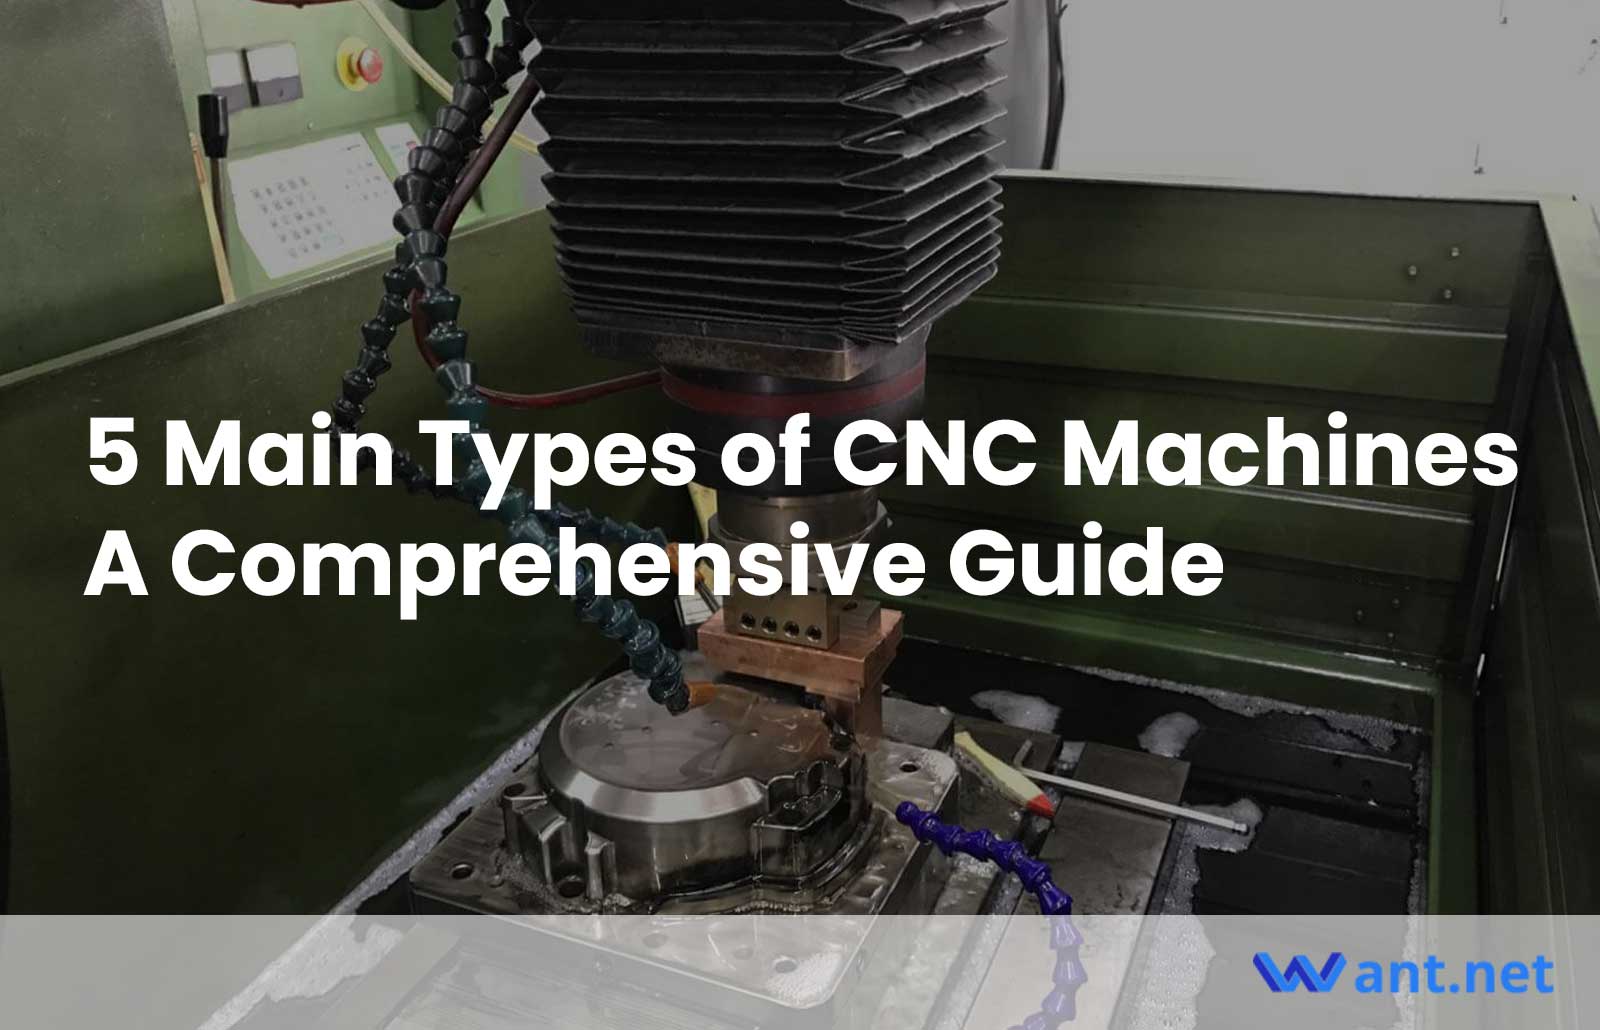 5 Main Types of CNC Machines: A Comprehensive Guide